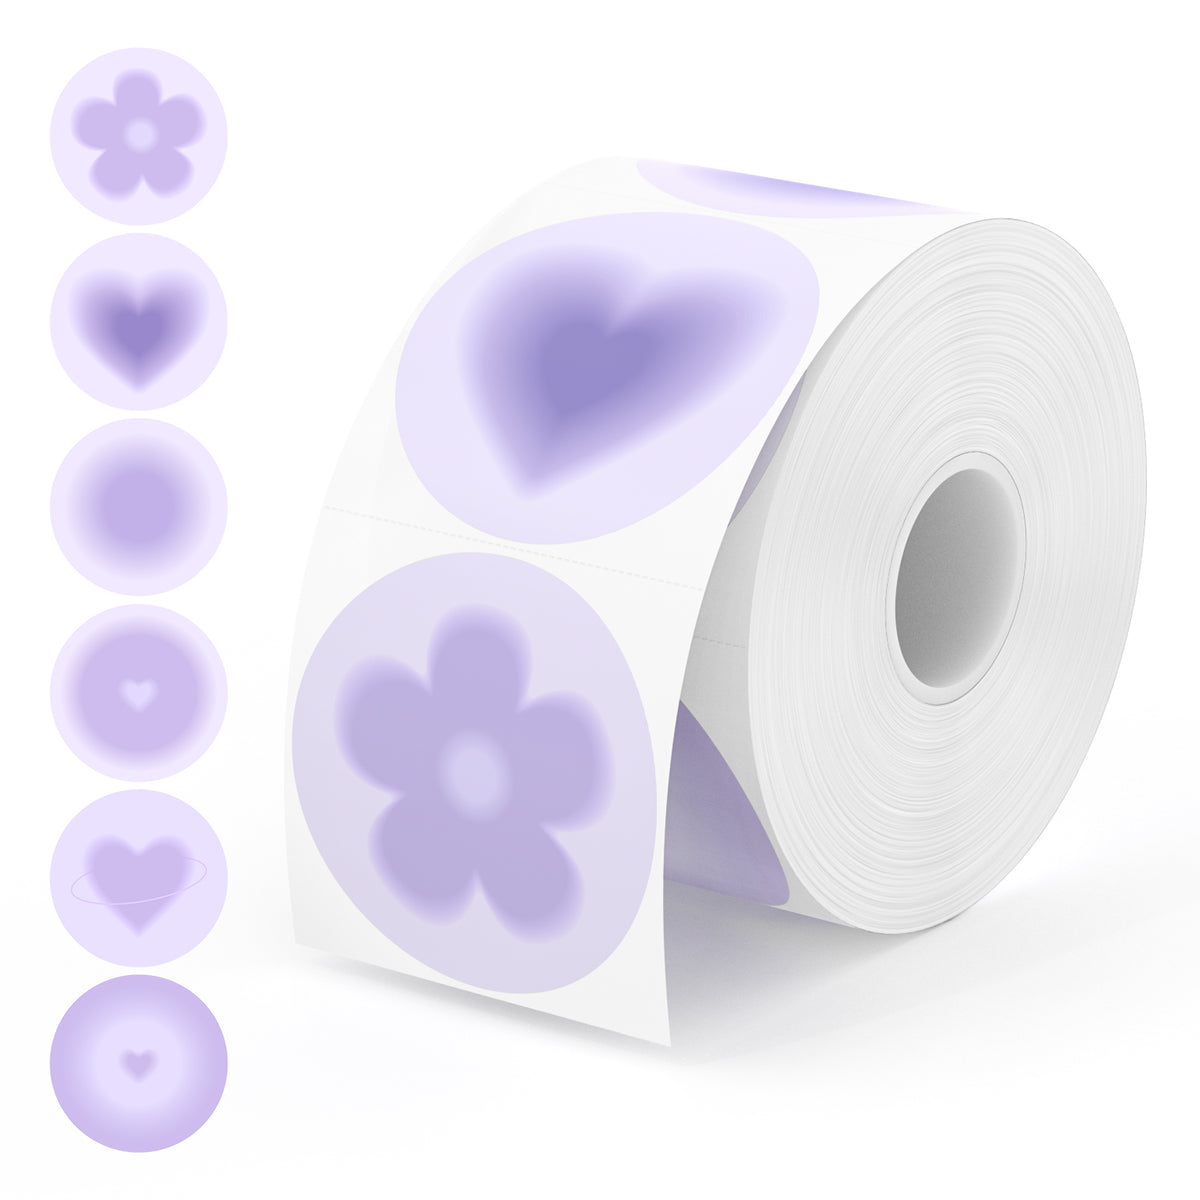 Elevate your labeling game with MUNBYN's 6-in-1 Purple Decorative Round Label Rolls, where each roll has six charming purple patterns. 